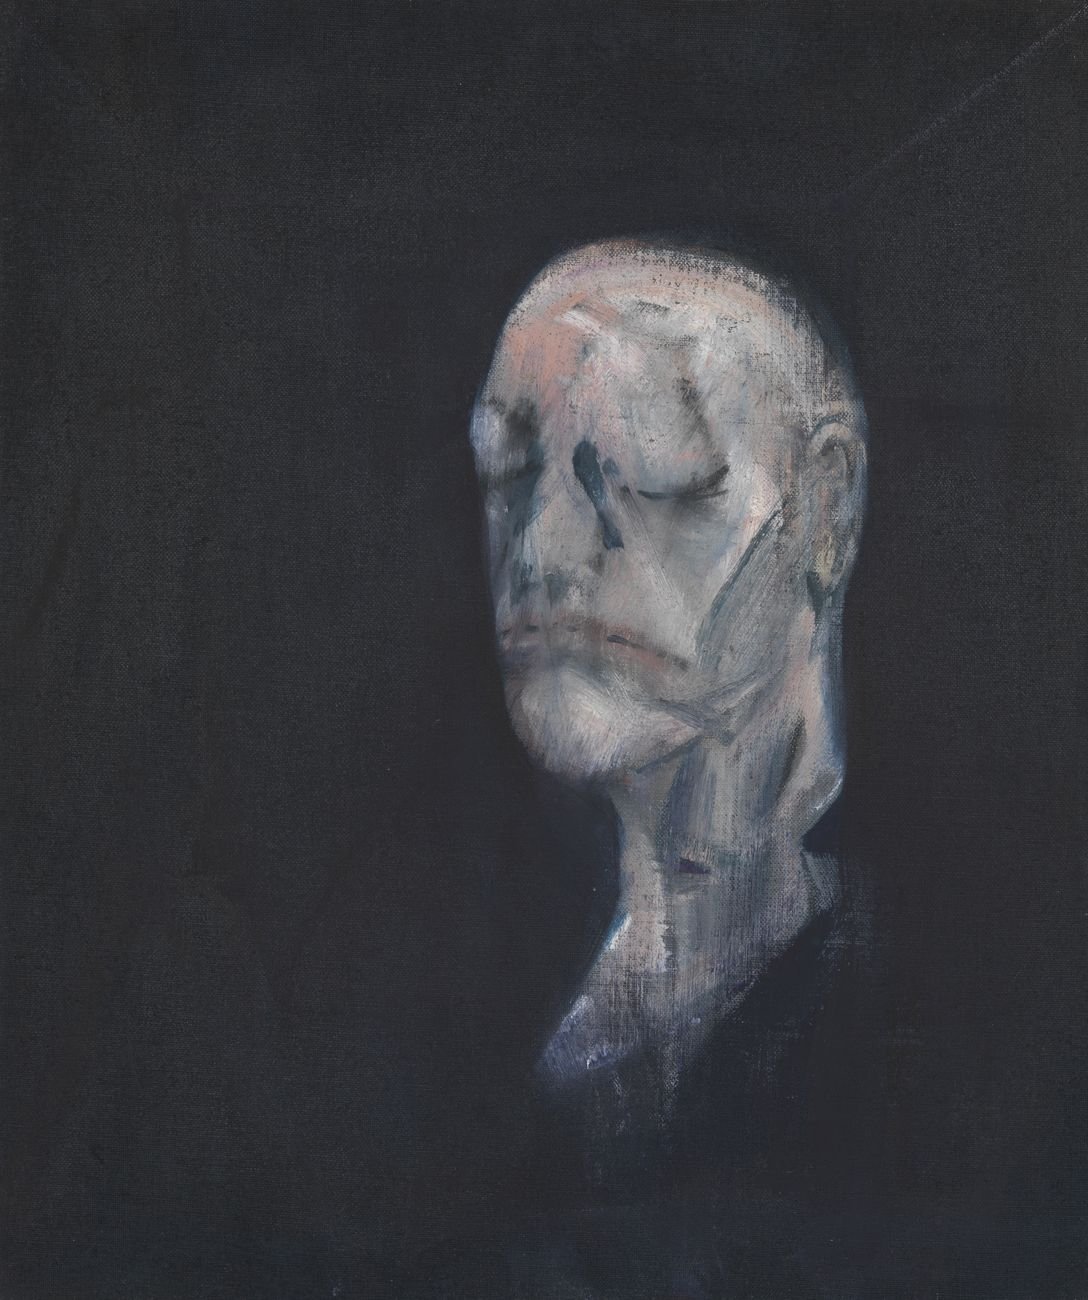 Francis Bacon, Study for Portrait II (after the Life Mask of William Blake), 1955 Tate © The Estate of Francis Bacon. All rights reserved by SIAE 2019. Photo © Tate, 2019